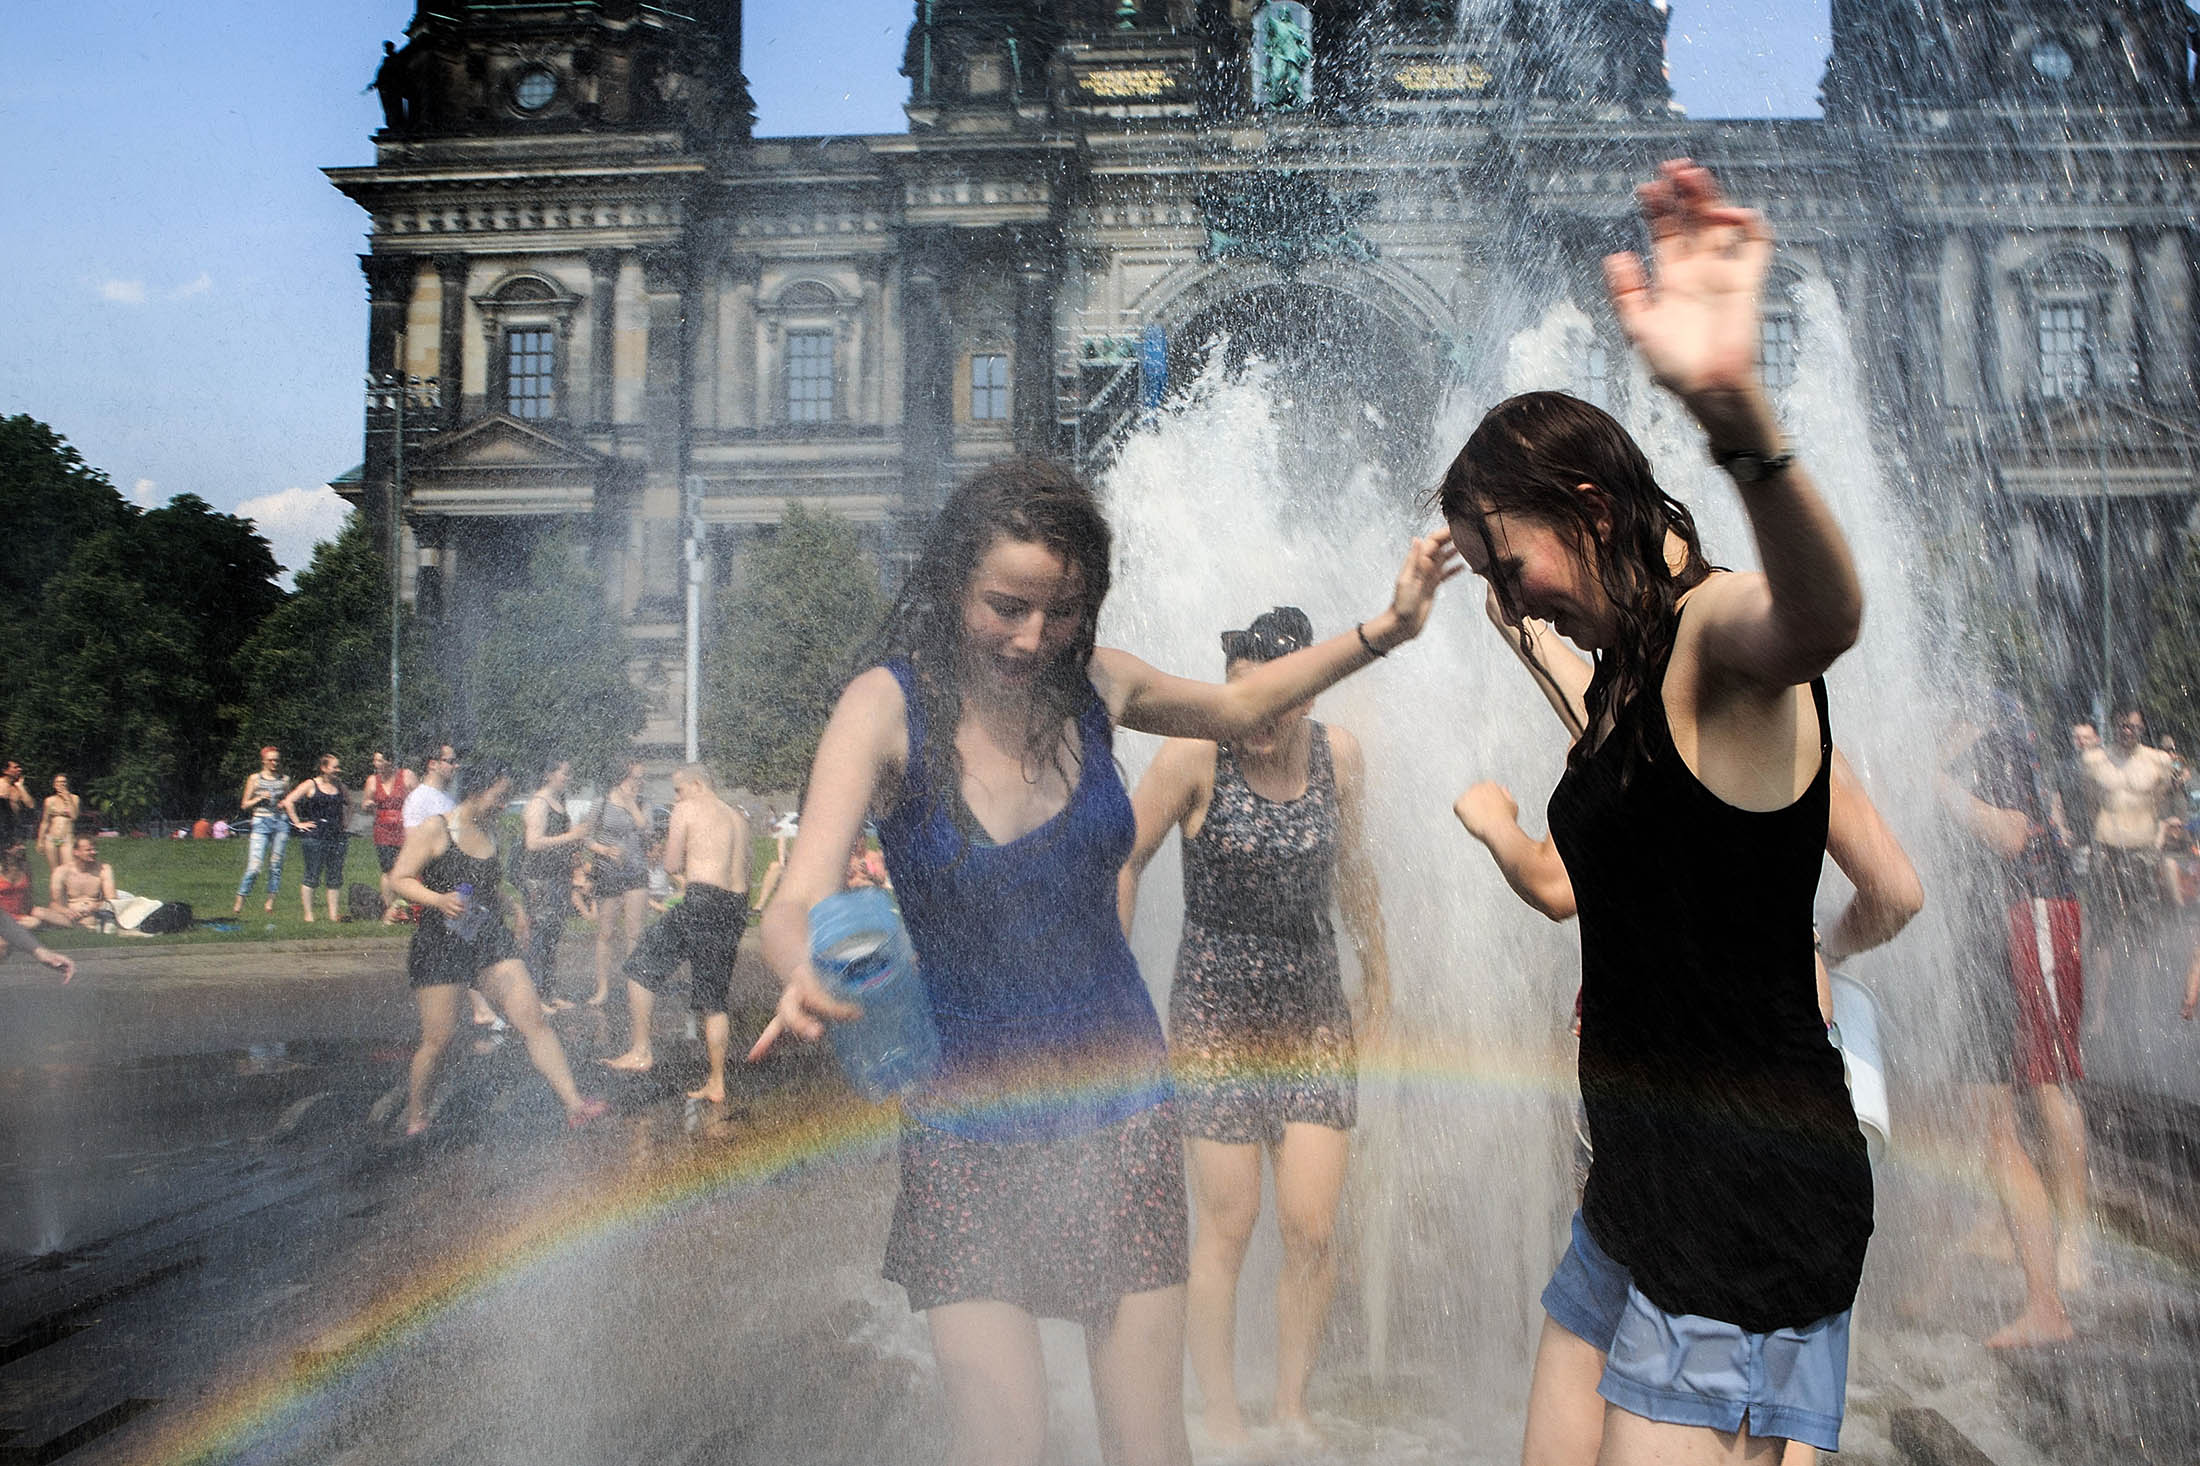 People stay cool in the water fountain in Berlin.
